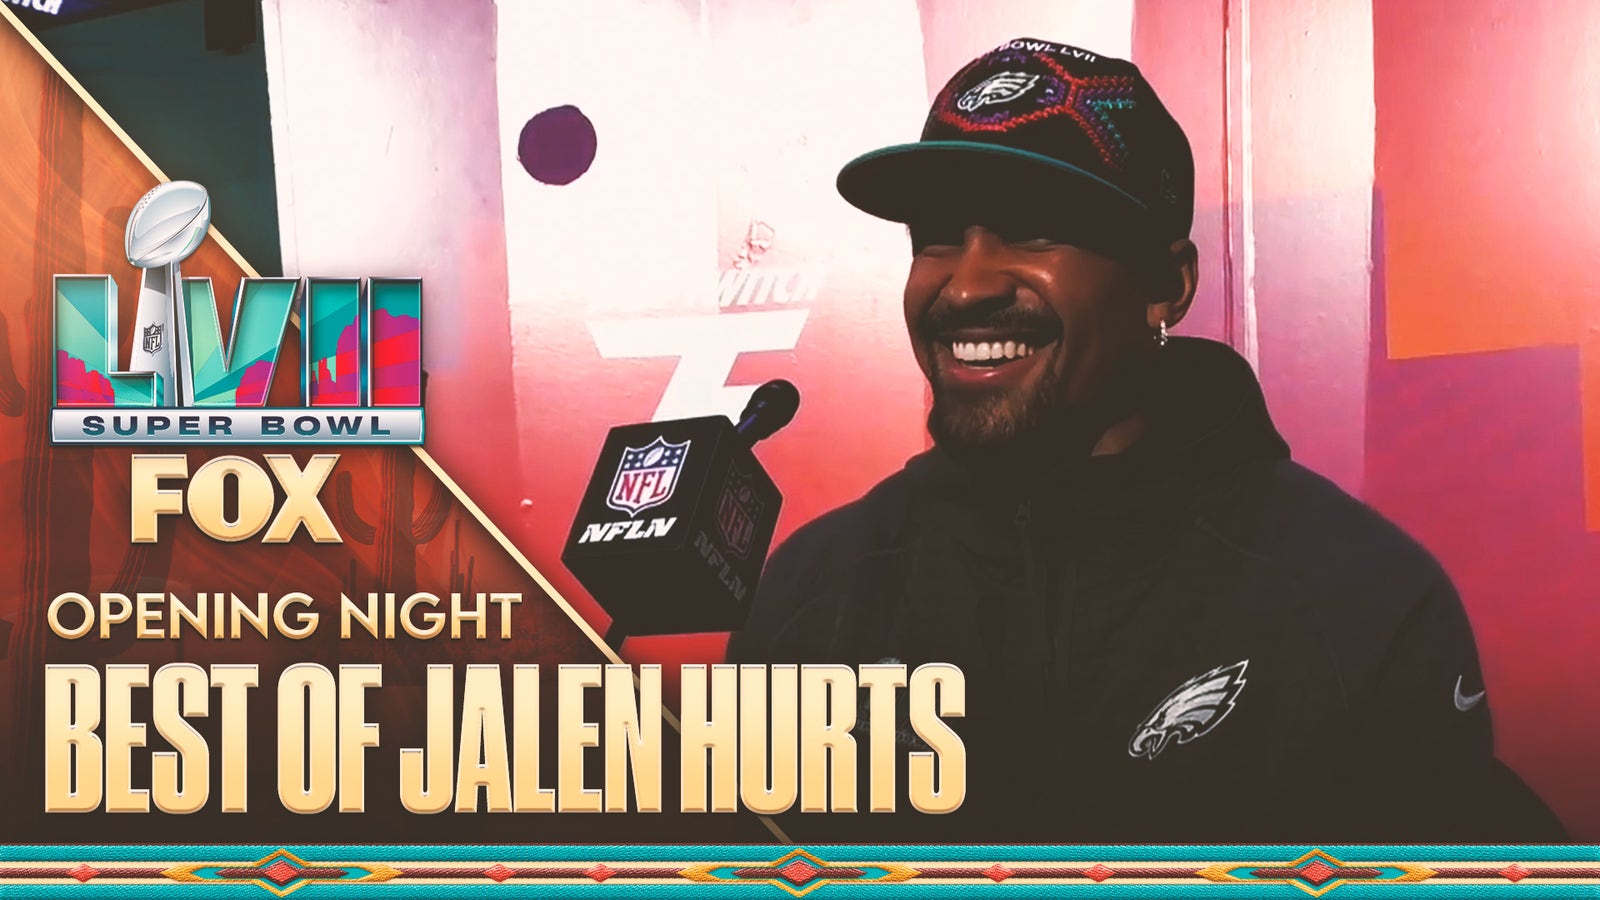 Eagles QB Jalen Hurts' BEST moments from the Opening Night of the Super Bowl